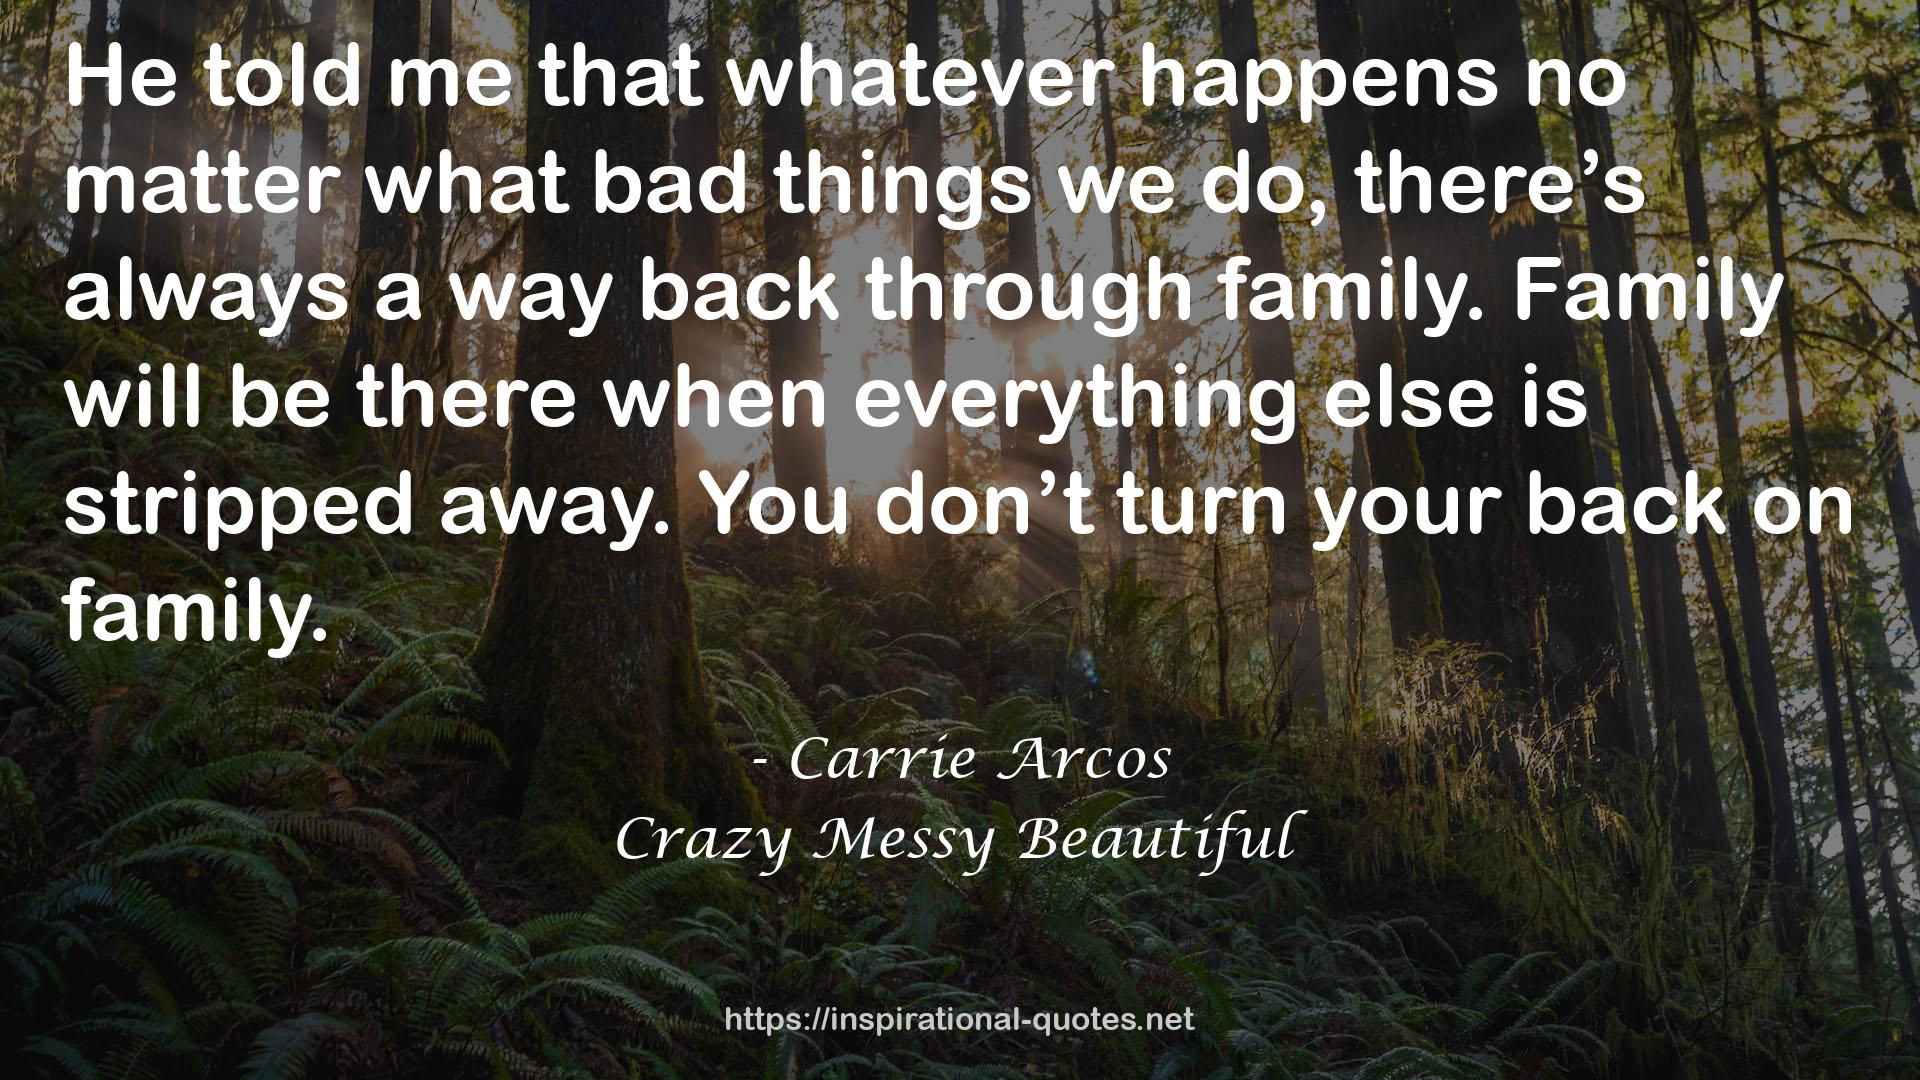 Carrie Arcos QUOTES